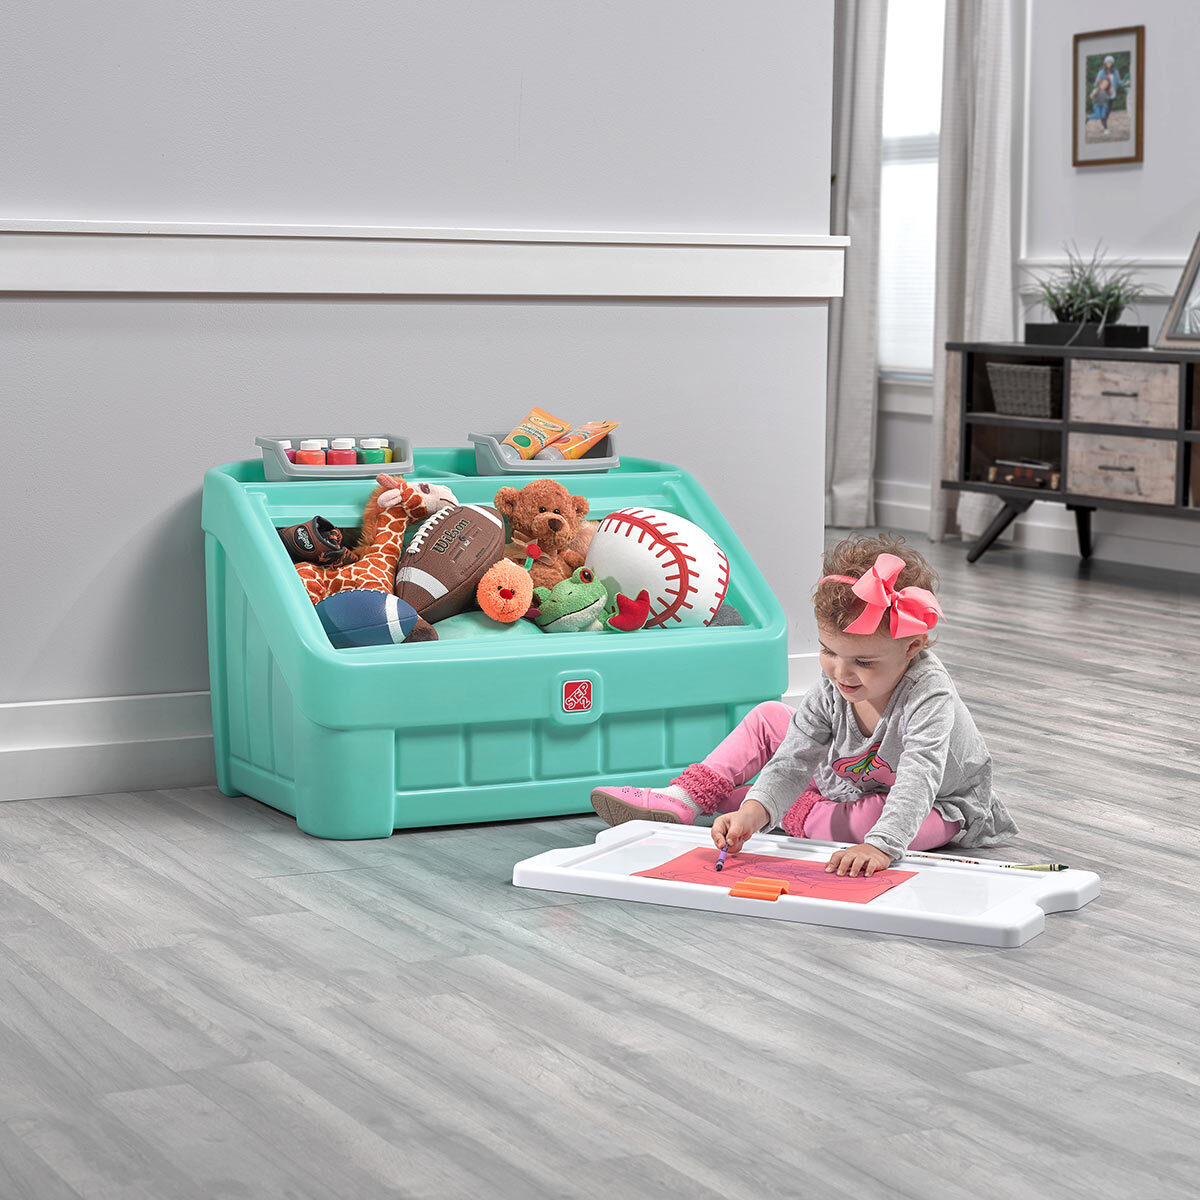 Buy 2-In-1 Toy Box & Art Lid Mint Lifestyle2 Image at Costco.co.uk